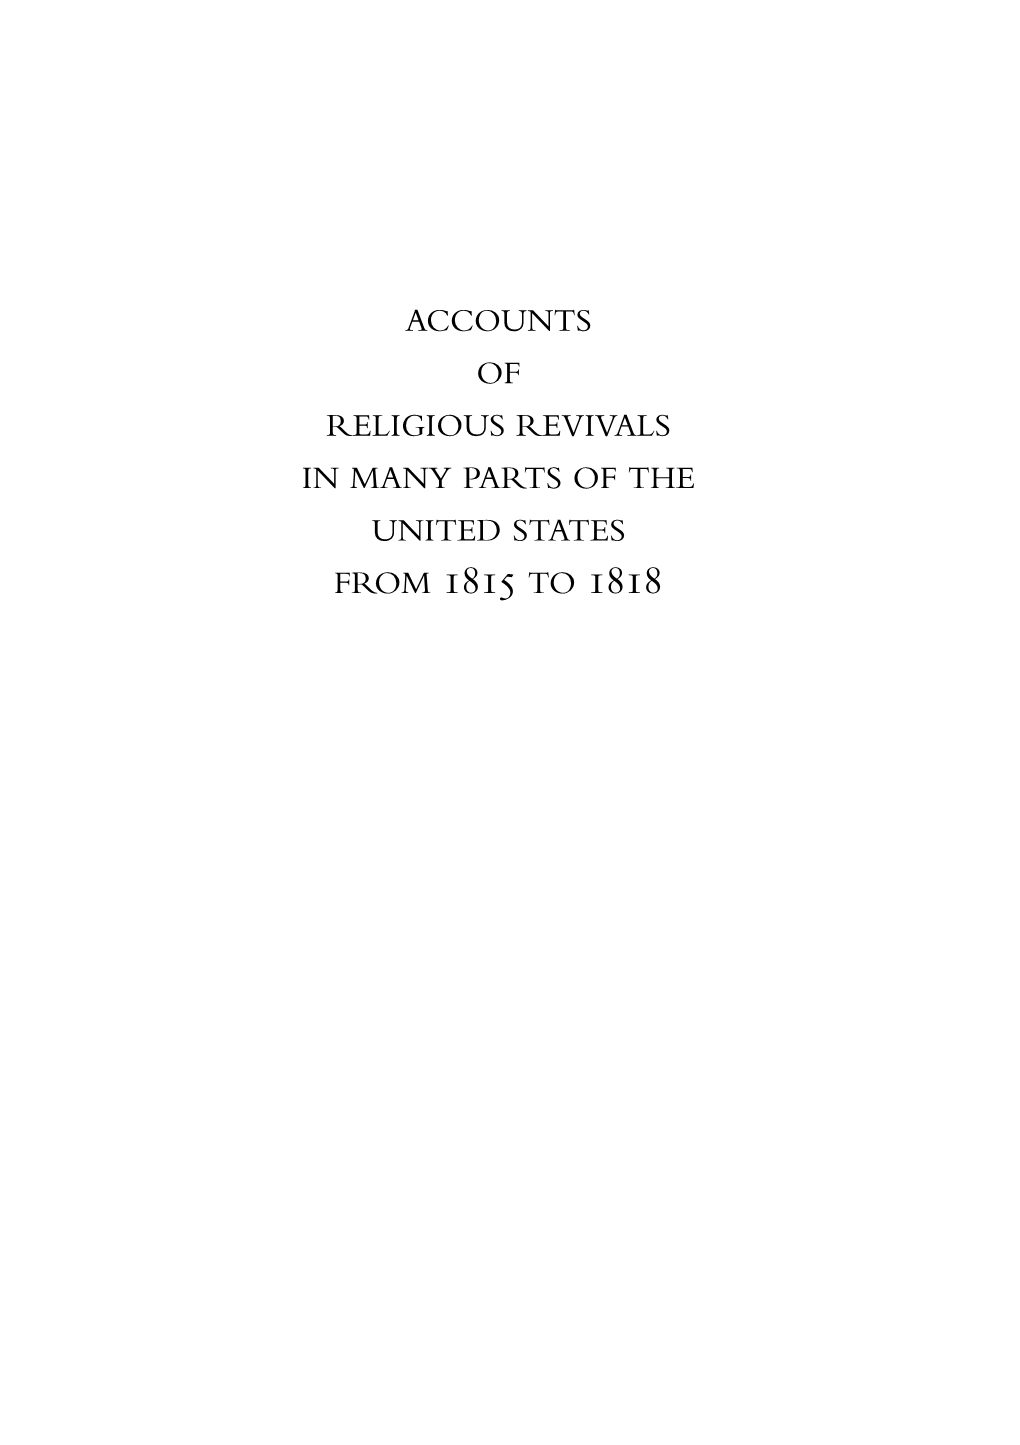 Accounts of Revivals in the United States 1815–1818 First Proof Reading Draft 7